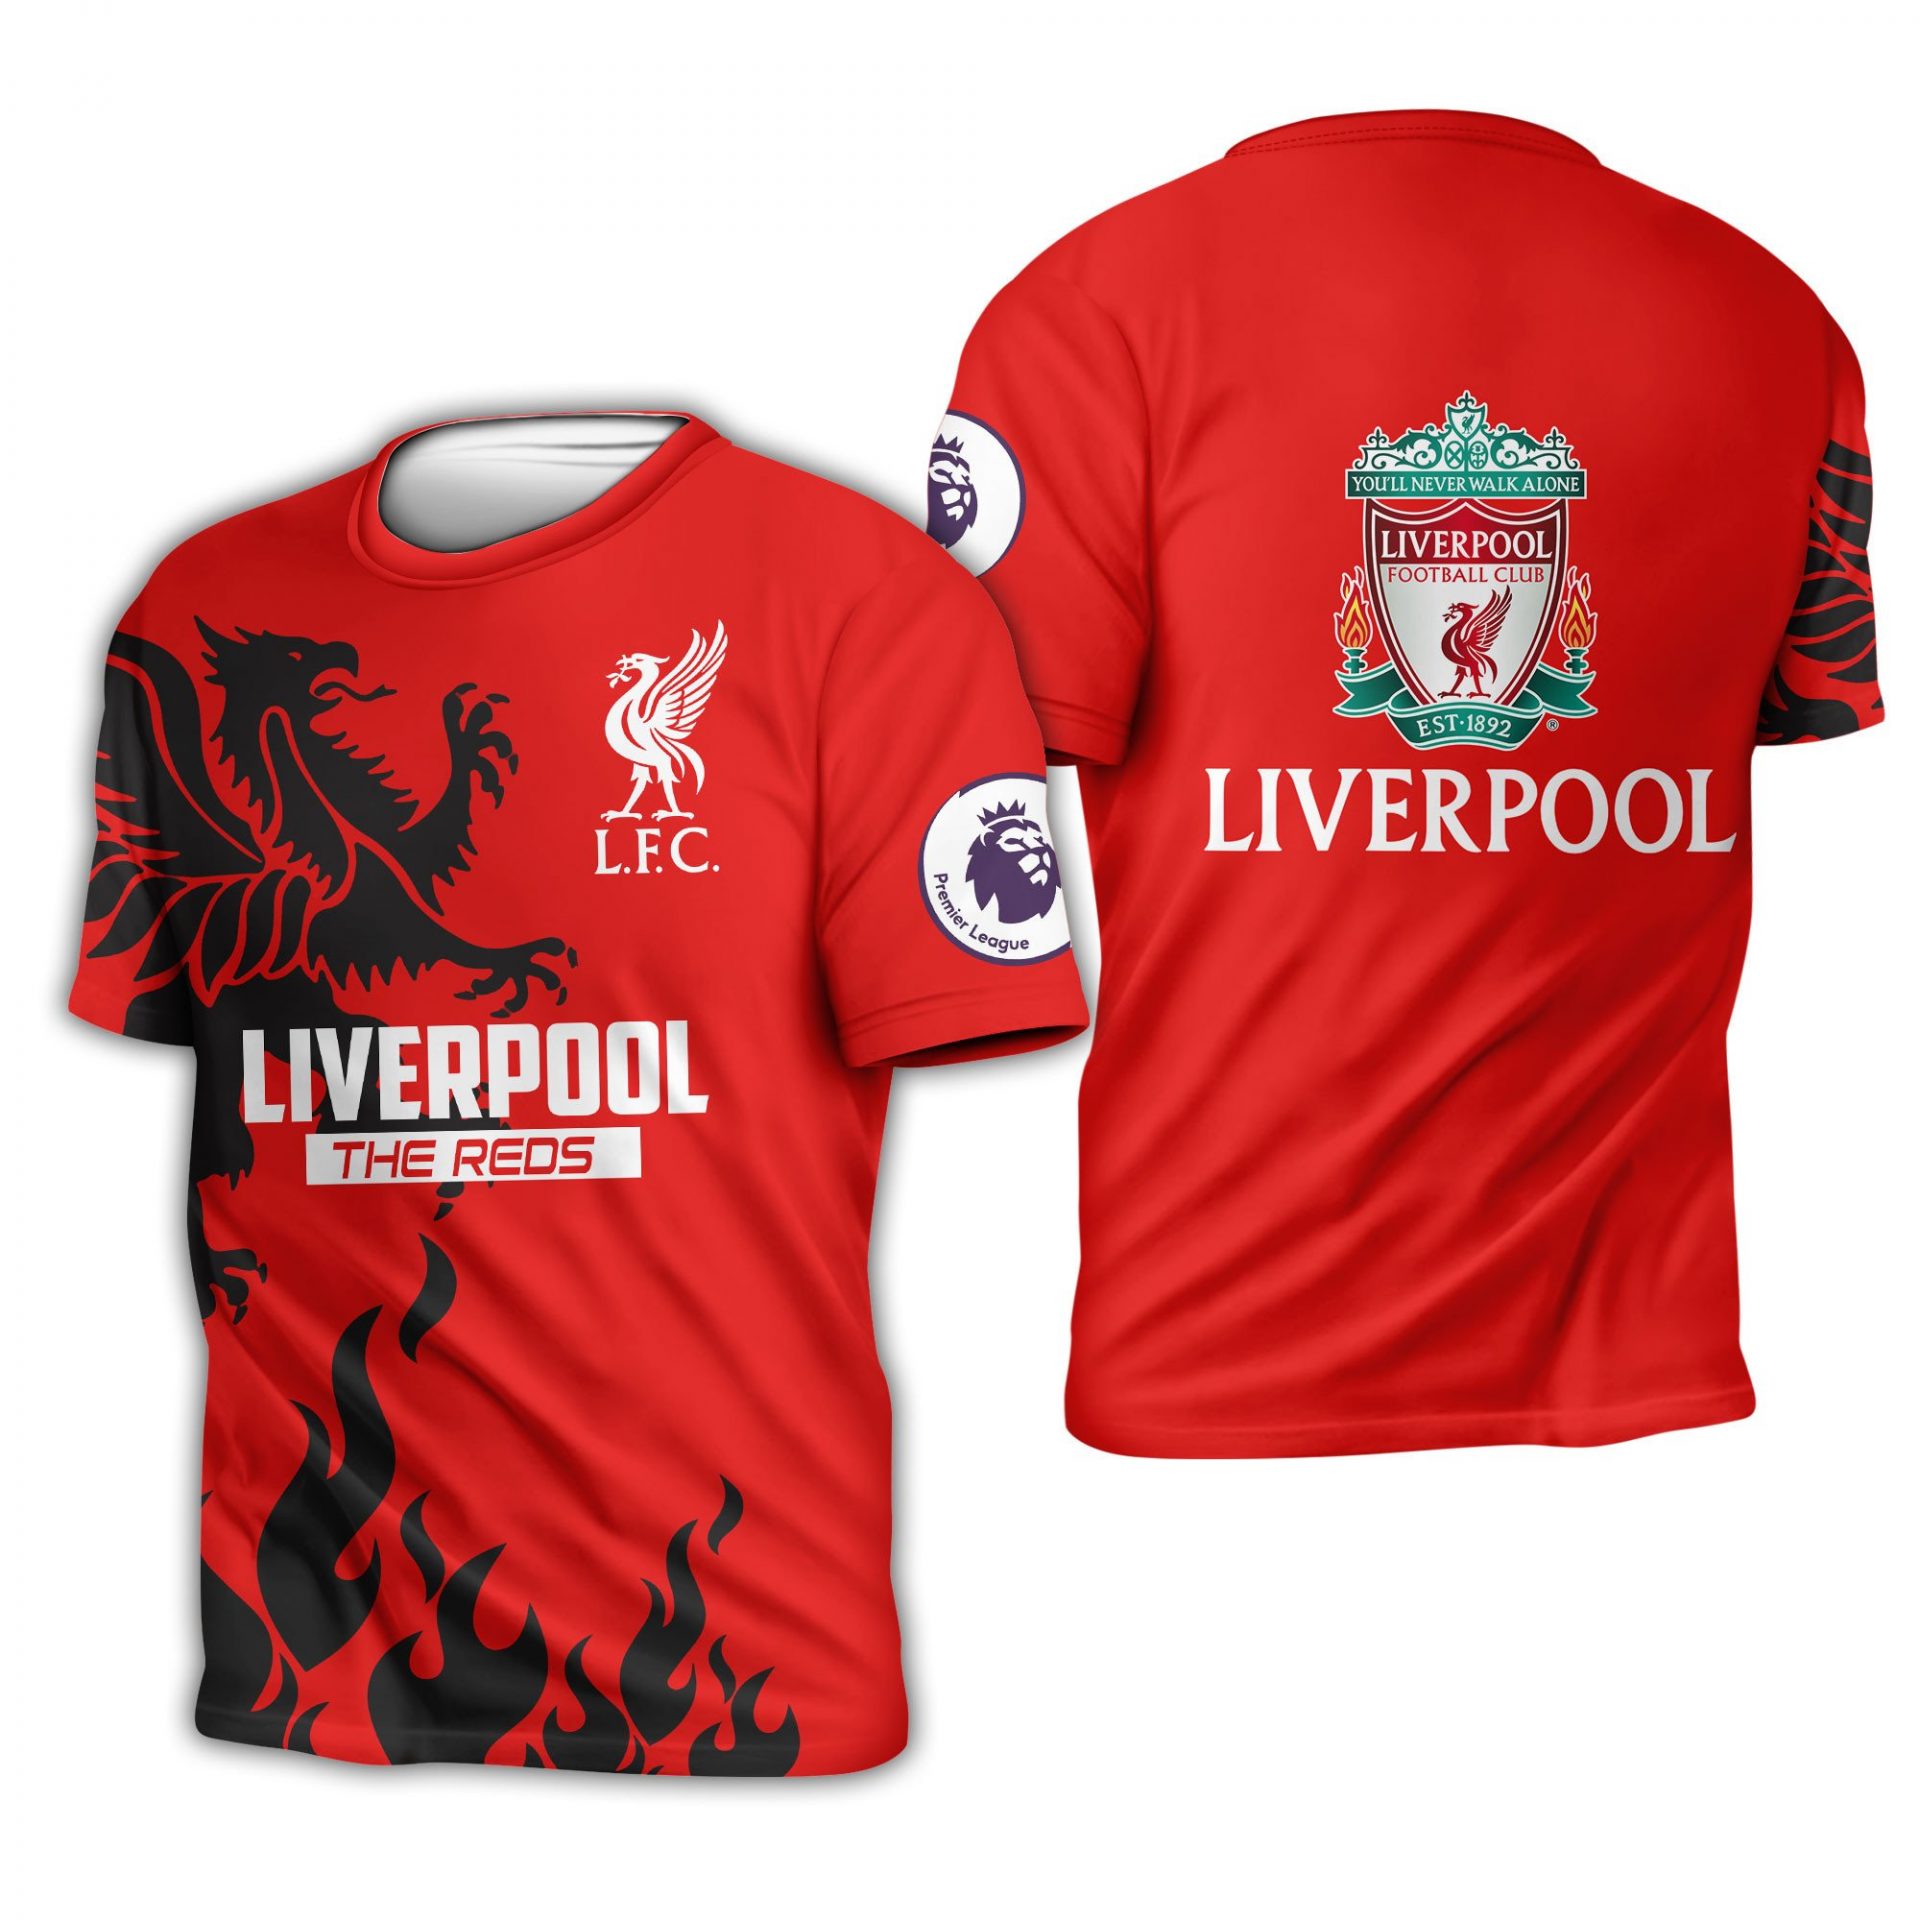 Liverpool FC The Reds T-Shirt